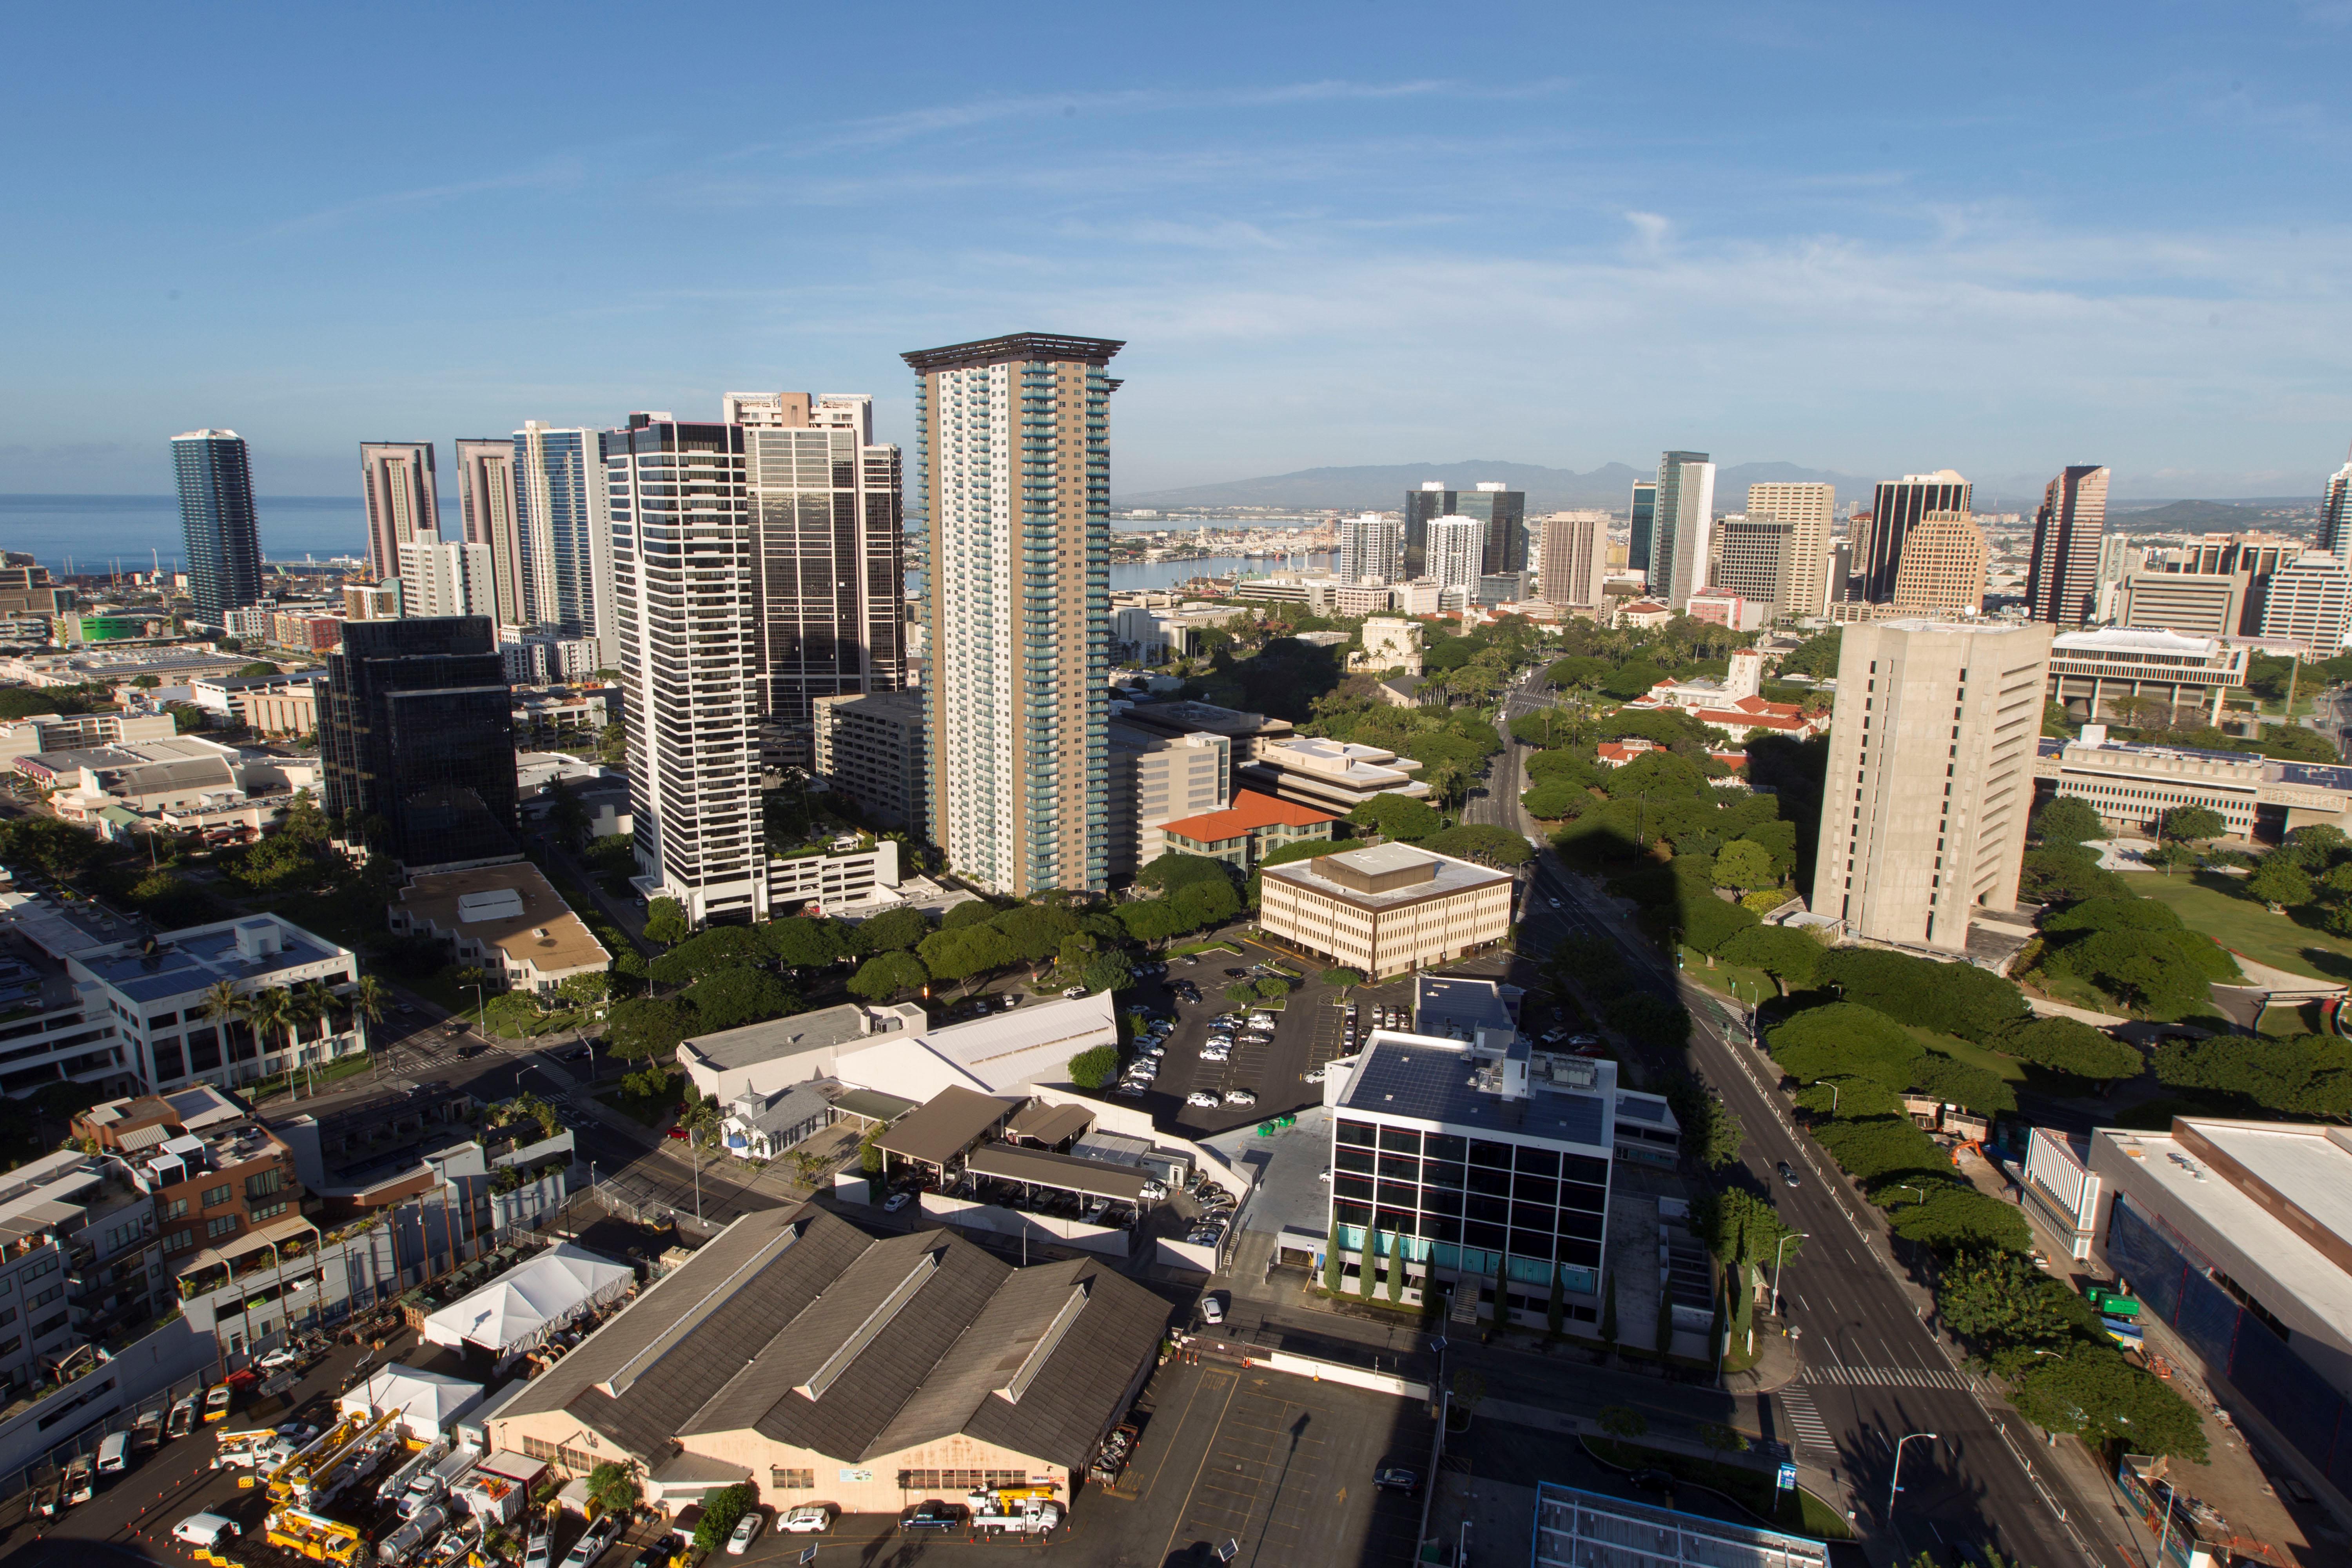 A morning view of the city of Honolulu, Hawaii is seen on January 13, 2018. Social media ignited on January 13, 2018 after apparent screenshots of cell phone emergency alerts warning of a 'ballistic missile threat inbound to Hawaii' began circulating, which US officials quickly dismissed as 'false.''Hawaii - this is a false alarm,' wrote Democratic Representative Tulsi Gabbard on Twitter. 'I have confirmed with officials there is no incoming missile.' The Hawaii Emergency Management Agency also confirmed there is 'NO missile threat to Hawaii.' US military spokesman David Benham said the US Pacific Command 'has detected no ballistic missile threat to Hawaii. Earlier message was sent in error,' adding that the US state would 'send out a correction message as soon as possible.' / AFP PHOTO / Eugene Tanner       